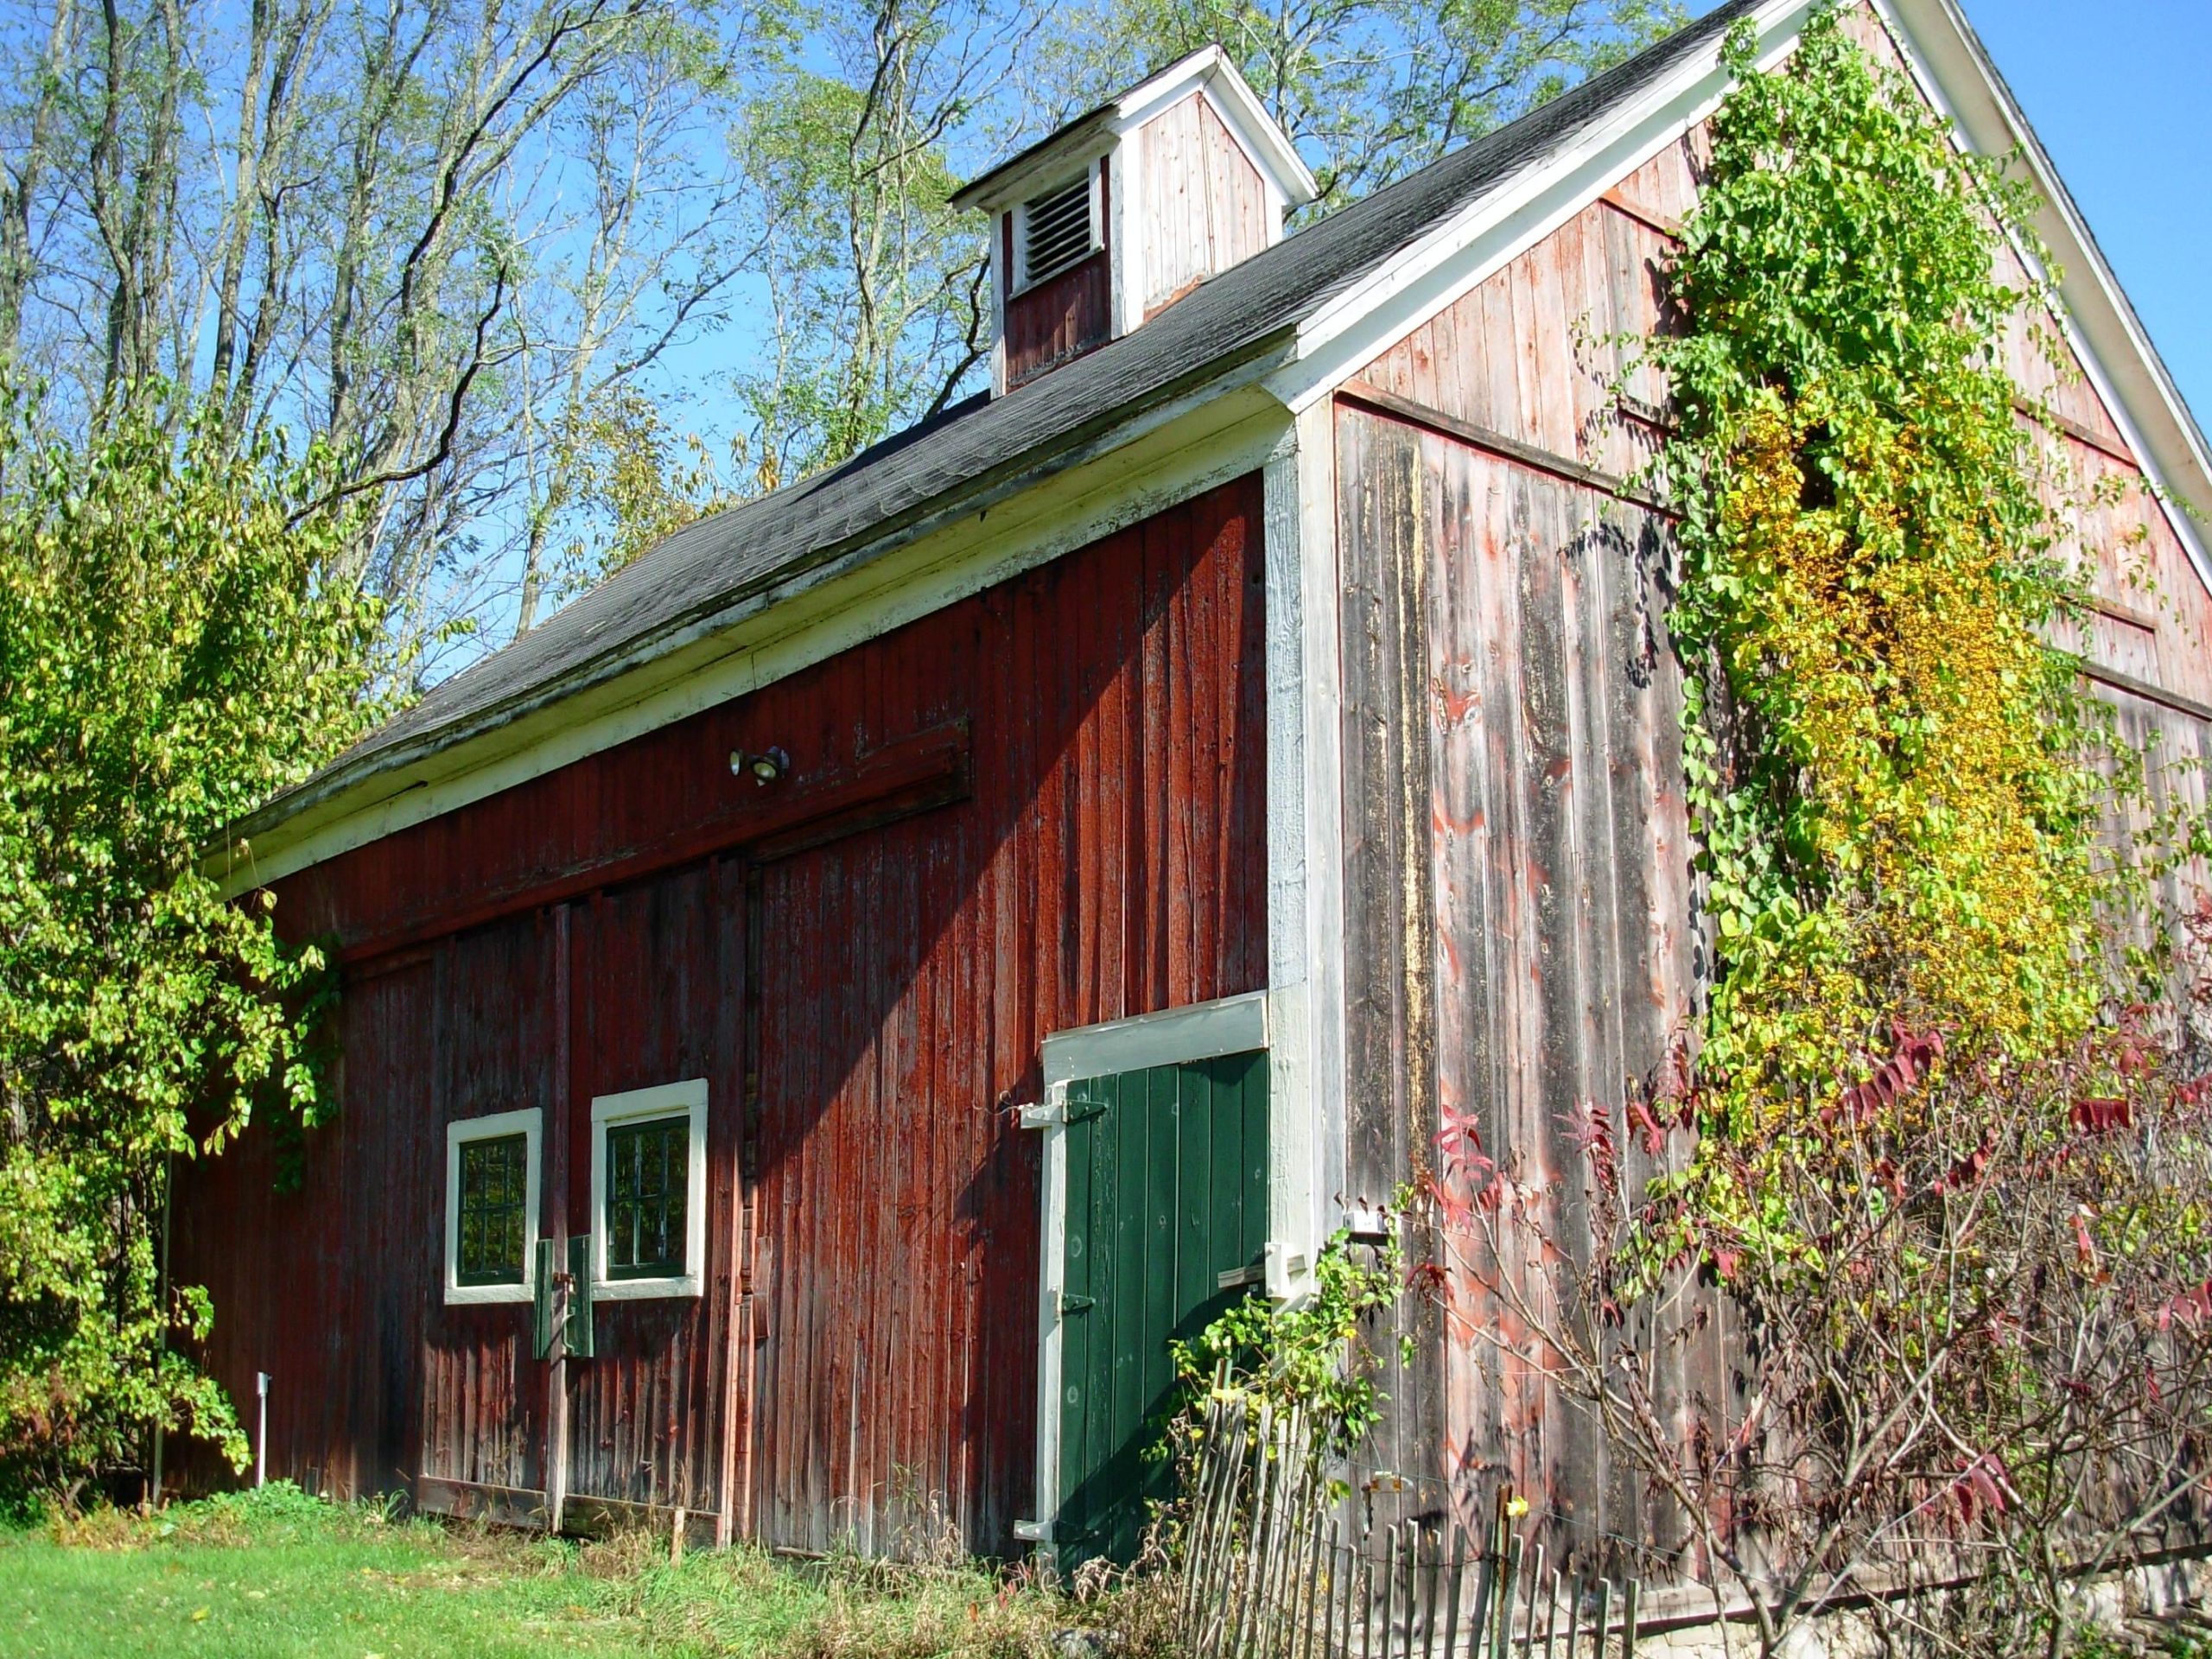 Vine-Covered Barn (user submitted)